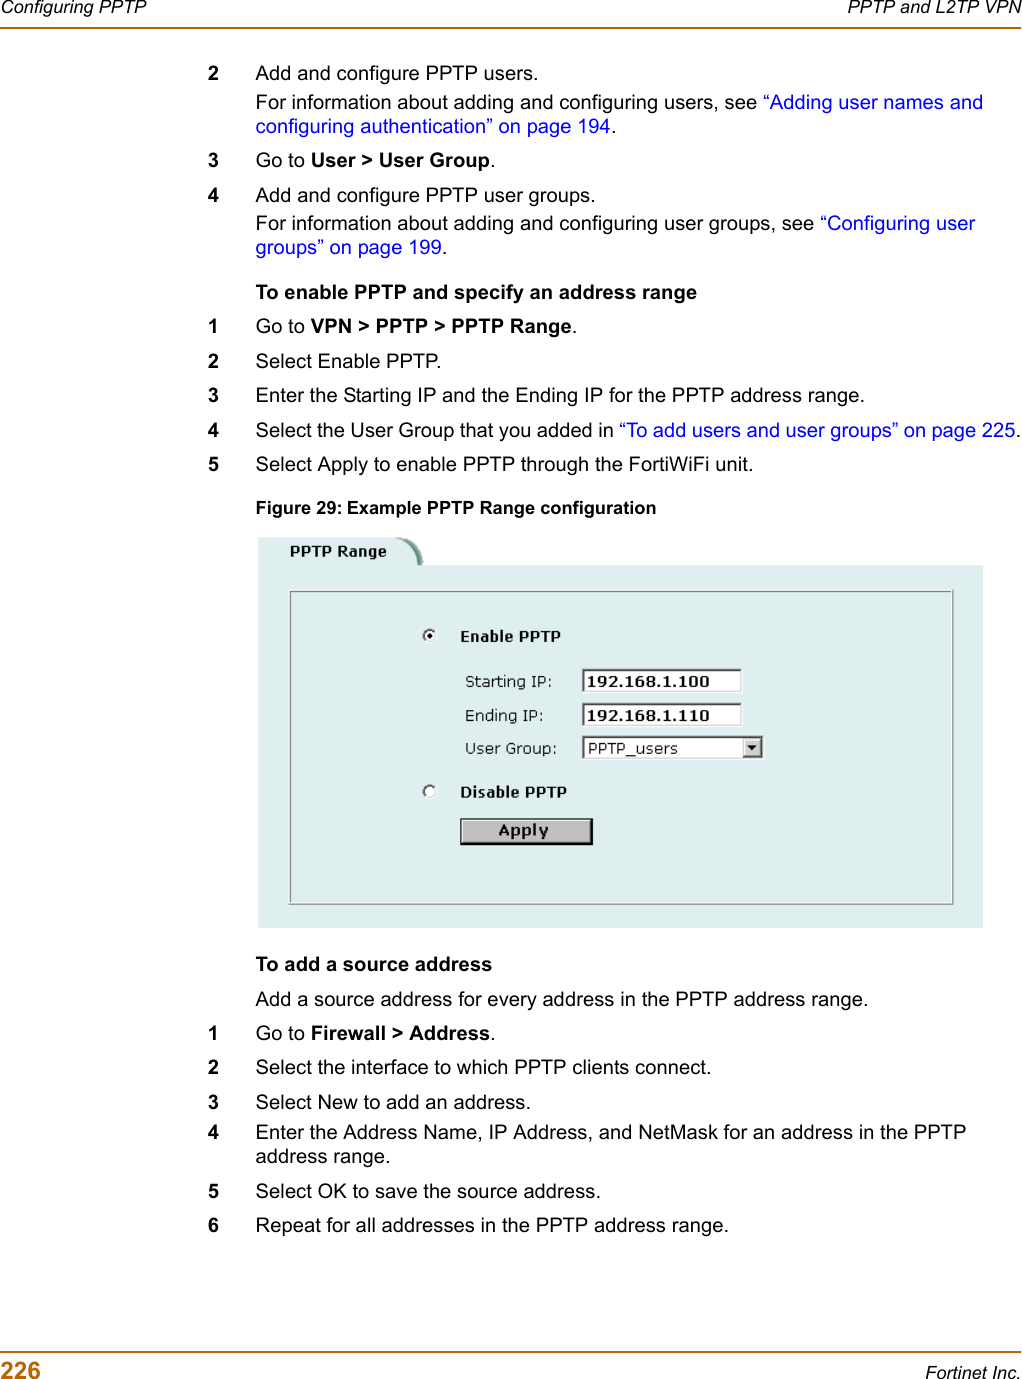 226 Fortinet Inc.Configuring PPTP PPTP and L2TP VPN2Add and configure PPTP users. For information about adding and configuring users, see “Adding user names and configuring authentication” on page 194.3Go to User &gt; User Group.4Add and configure PPTP user groups.For information about adding and configuring user groups, see “Configuring user groups” on page 199.To enable PPTP and specify an address range1Go to VPN &gt; PPTP &gt; PPTP Range.2Select Enable PPTP.3Enter the Starting IP and the Ending IP for the PPTP address range.4Select the User Group that you added in “To add users and user groups” on page 225.5Select Apply to enable PPTP through the FortiWiFi unit.Figure 29: Example PPTP Range configurationTo add a source address Add a source address for every address in the PPTP address range.1Go to Firewall &gt; Address.2Select the interface to which PPTP clients connect. 3Select New to add an address.4Enter the Address Name, IP Address, and NetMask for an address in the PPTP address range.5Select OK to save the source address.6Repeat for all addresses in the PPTP address range.